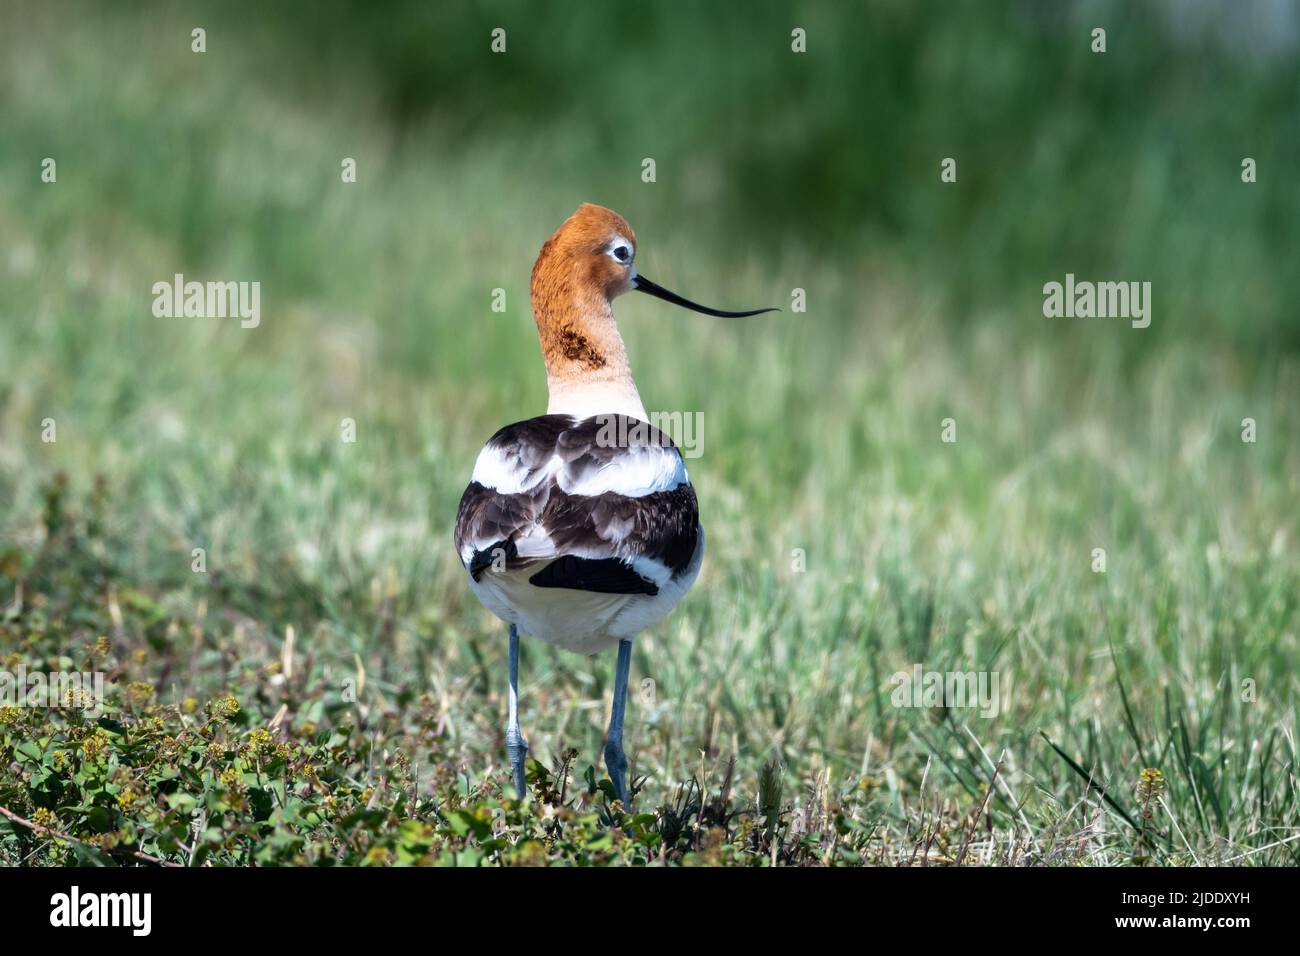 Rear view of an American Avocet, Recurvirostra americana, standing in green grass Stock Photo